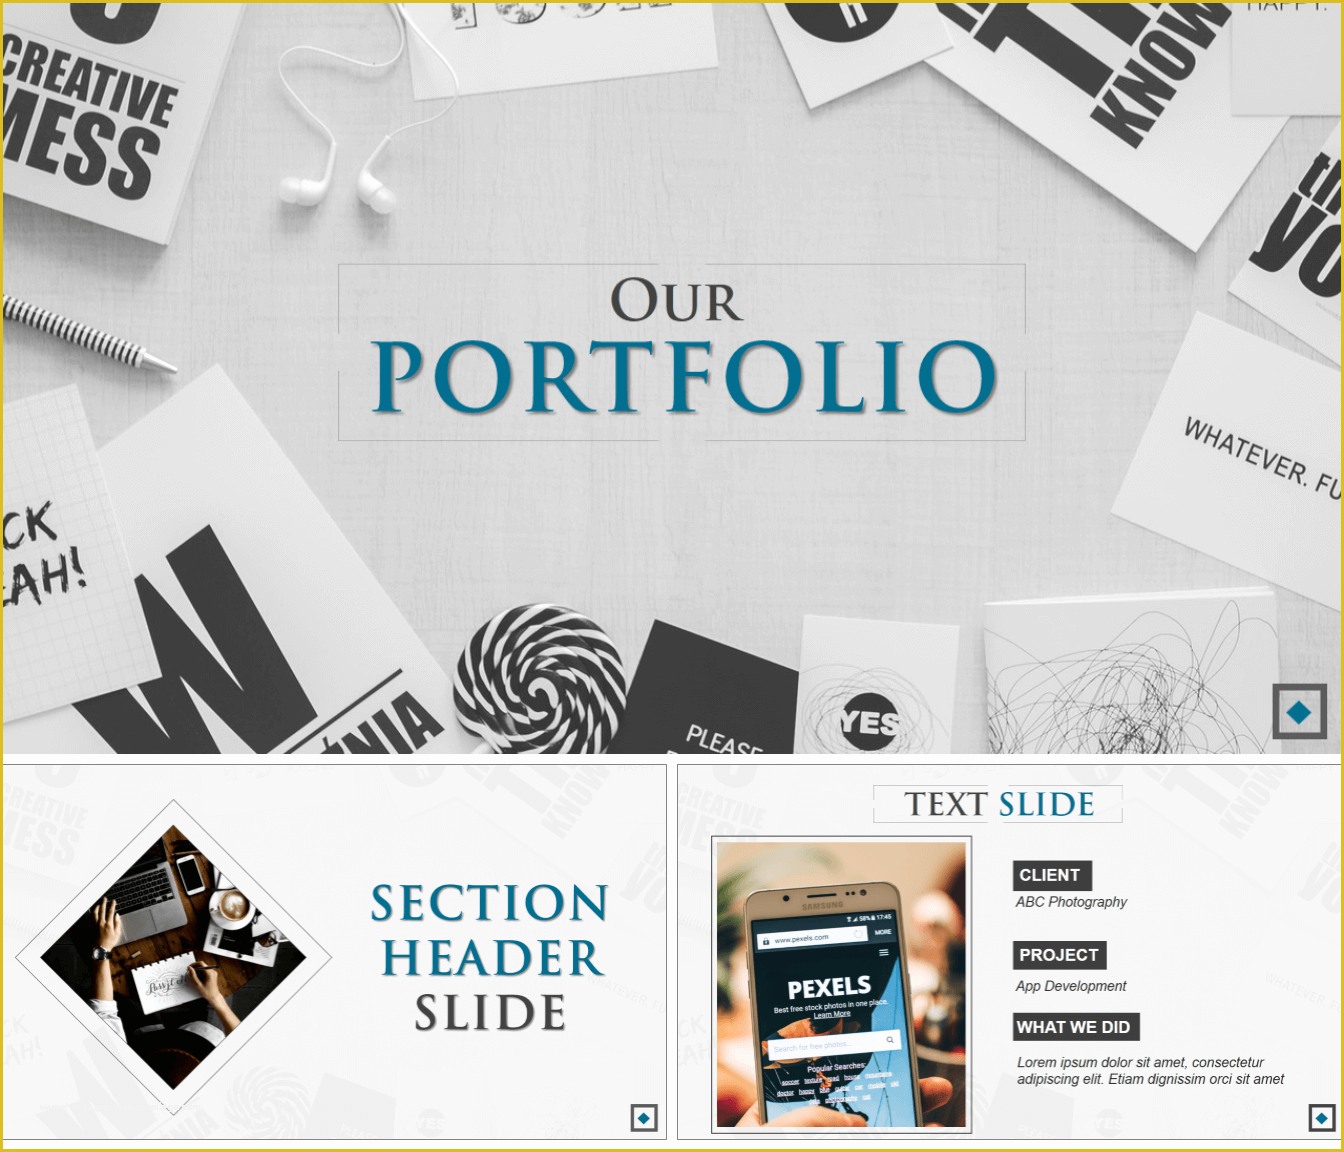 Portfolio Presentation Template Free Of 7 Amazing Powerpoint Template Designs for Your Pany or